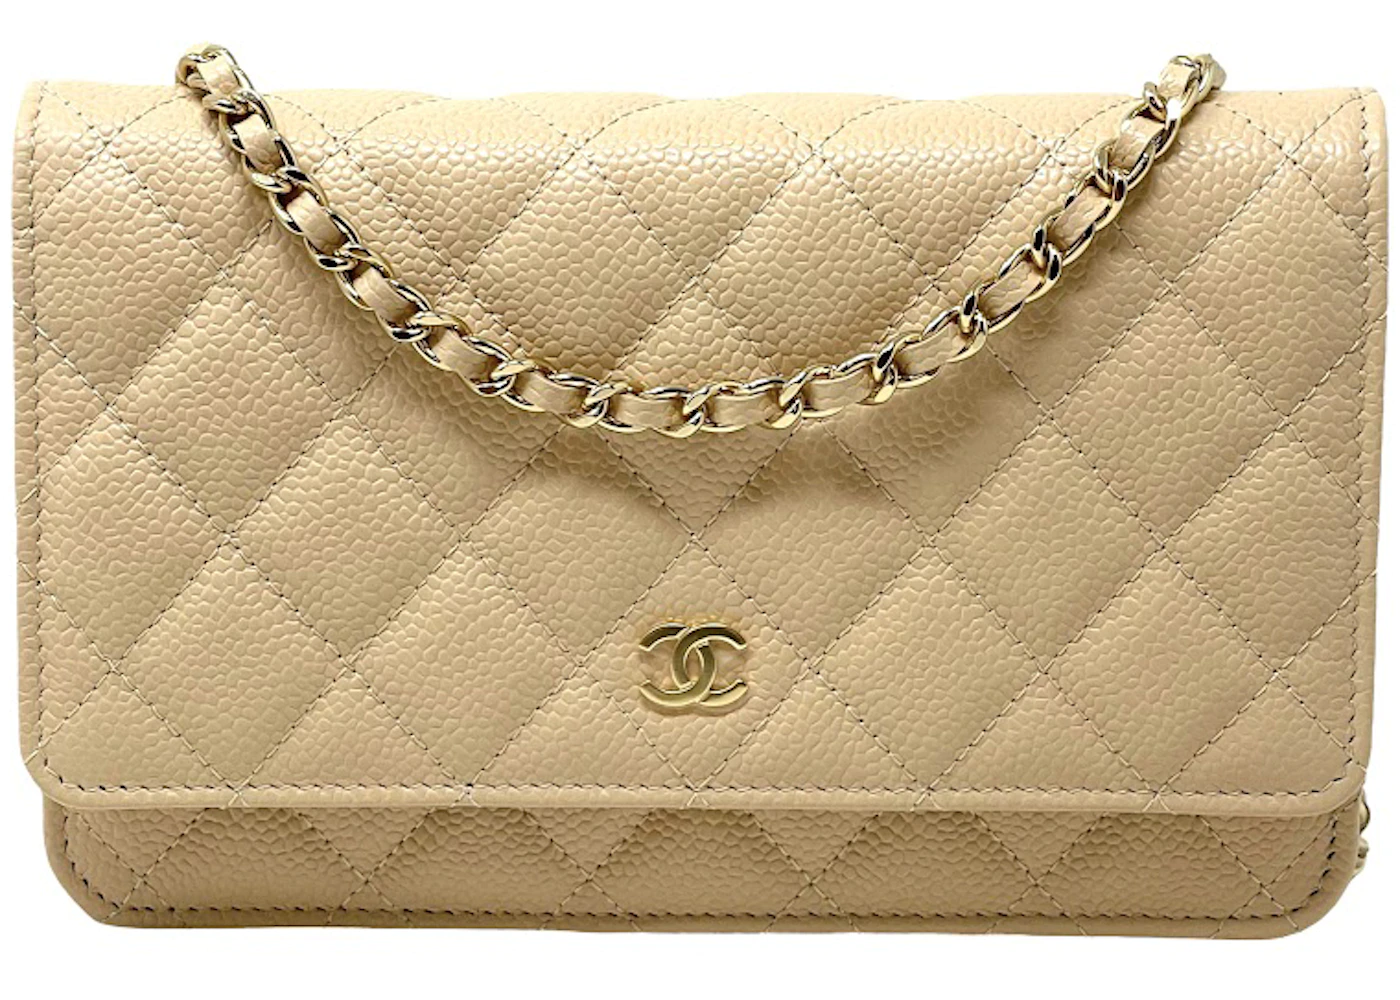 Timeless/classique leather crossbody bag Chanel Beige in Leather - 36897604